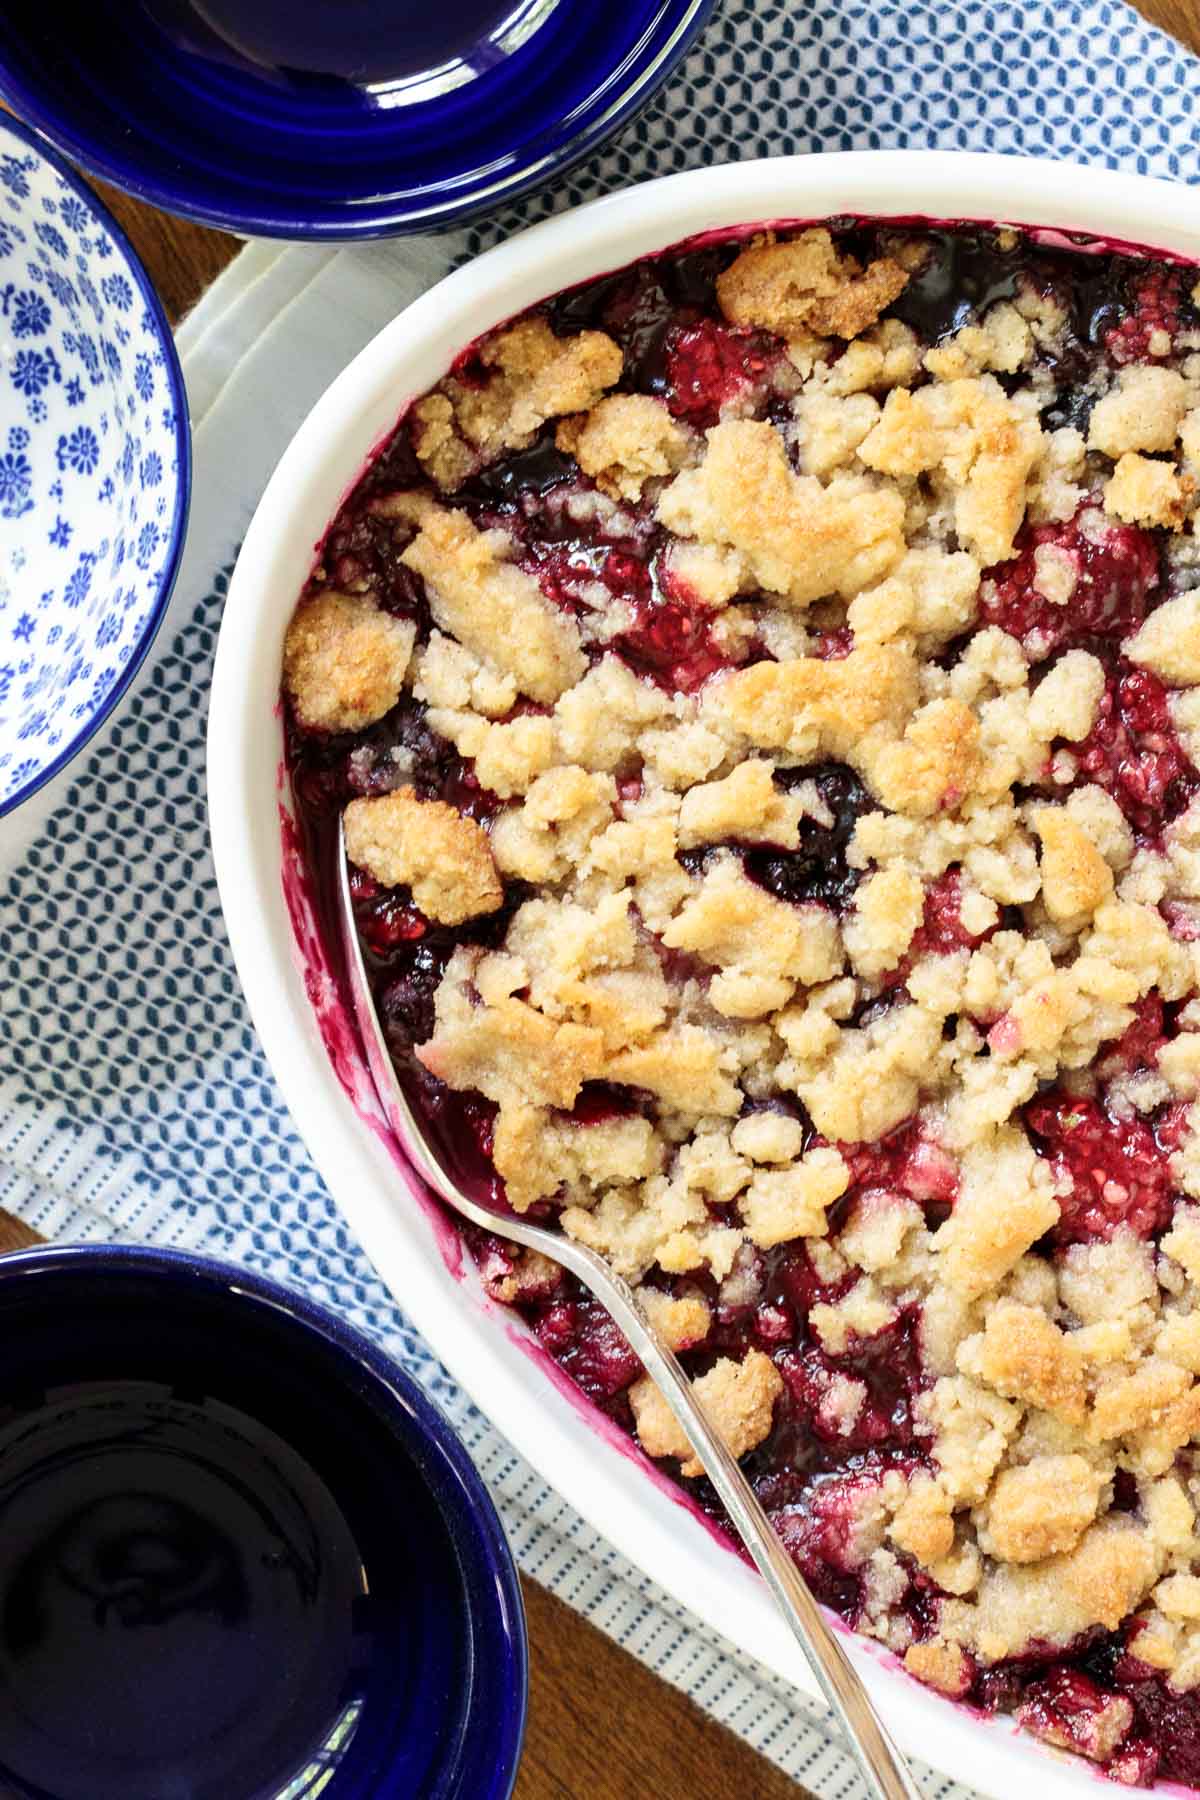 Overhead vertical closeup photo of a Ridiculously Easy Summer Berry Crisp in a white porcelain serving dish surrounded by blue and white individual serving dishes.